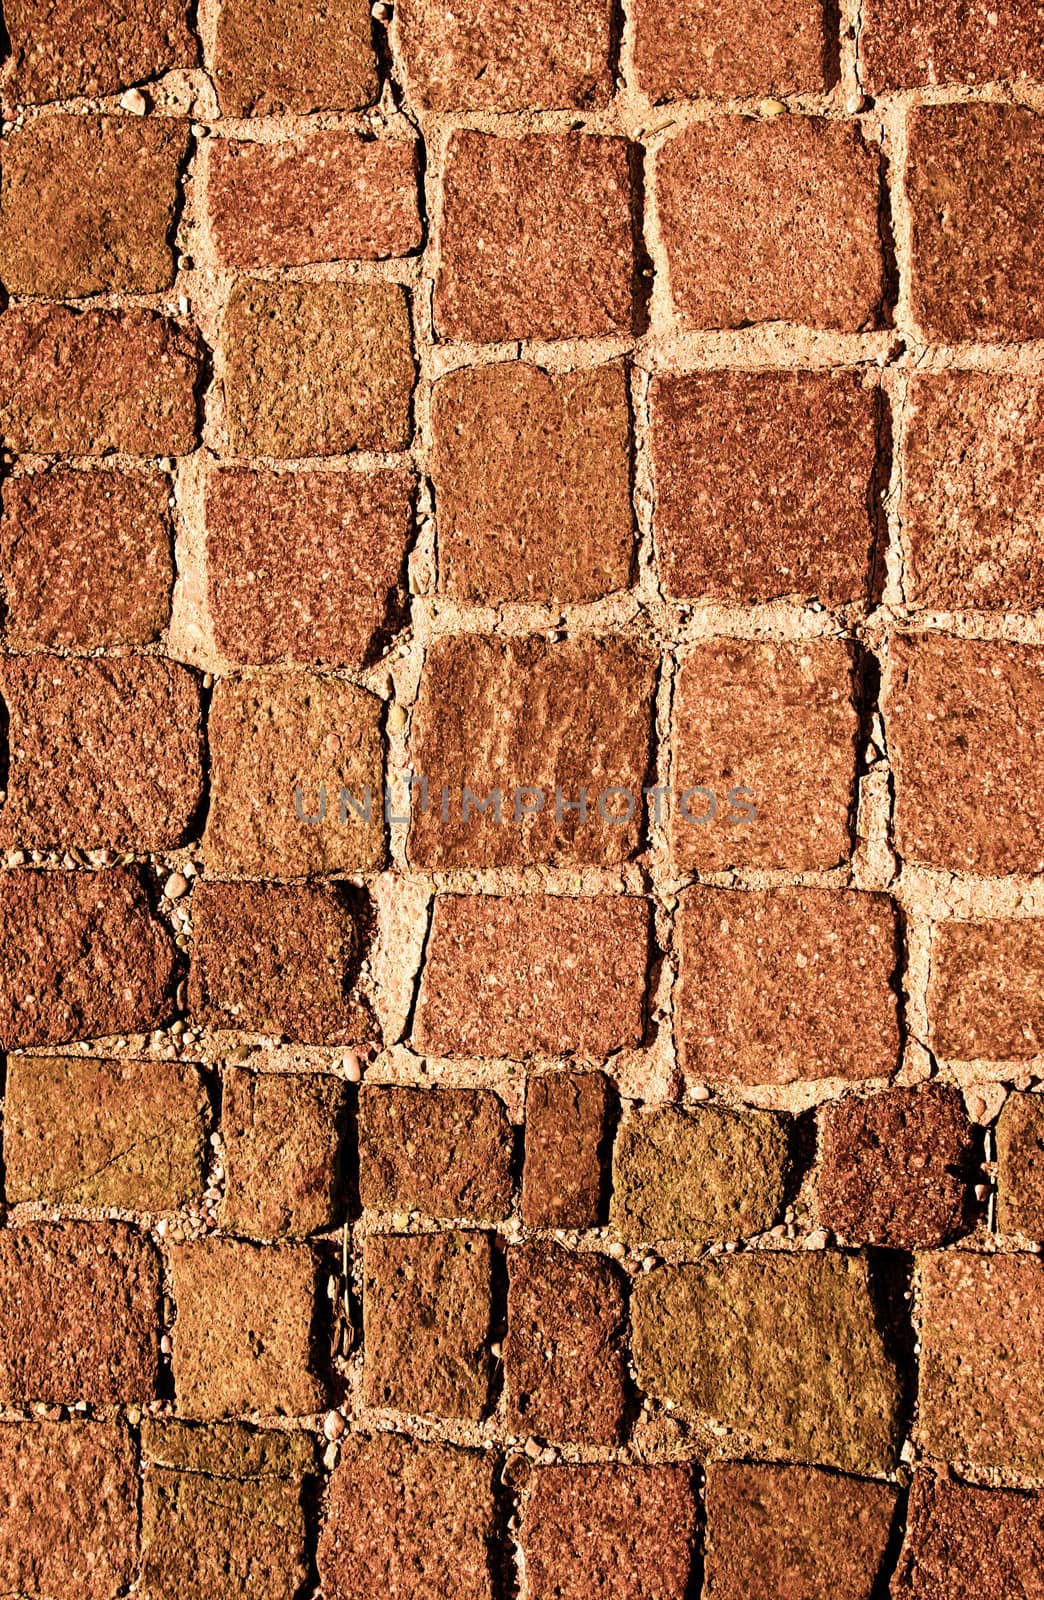 Rock wall, close up.Texture background. Great details.